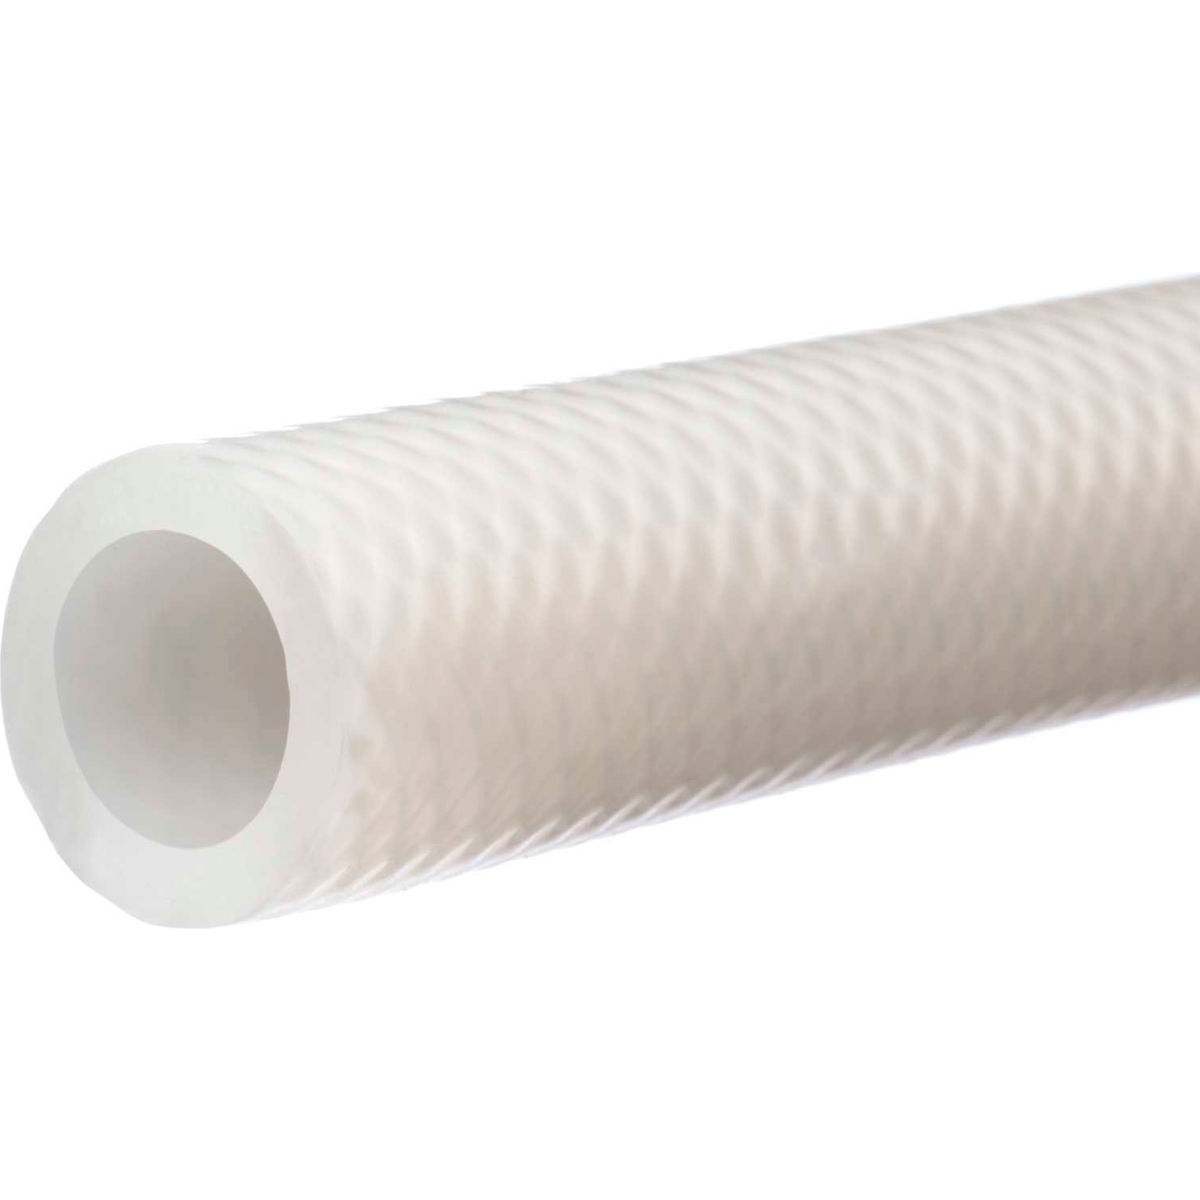 Picture of USA Sealing B2270458 1 in. ID x 1.37 in. OD x 5 ft. Reinforced High Pressure FDA Silicone Tubing